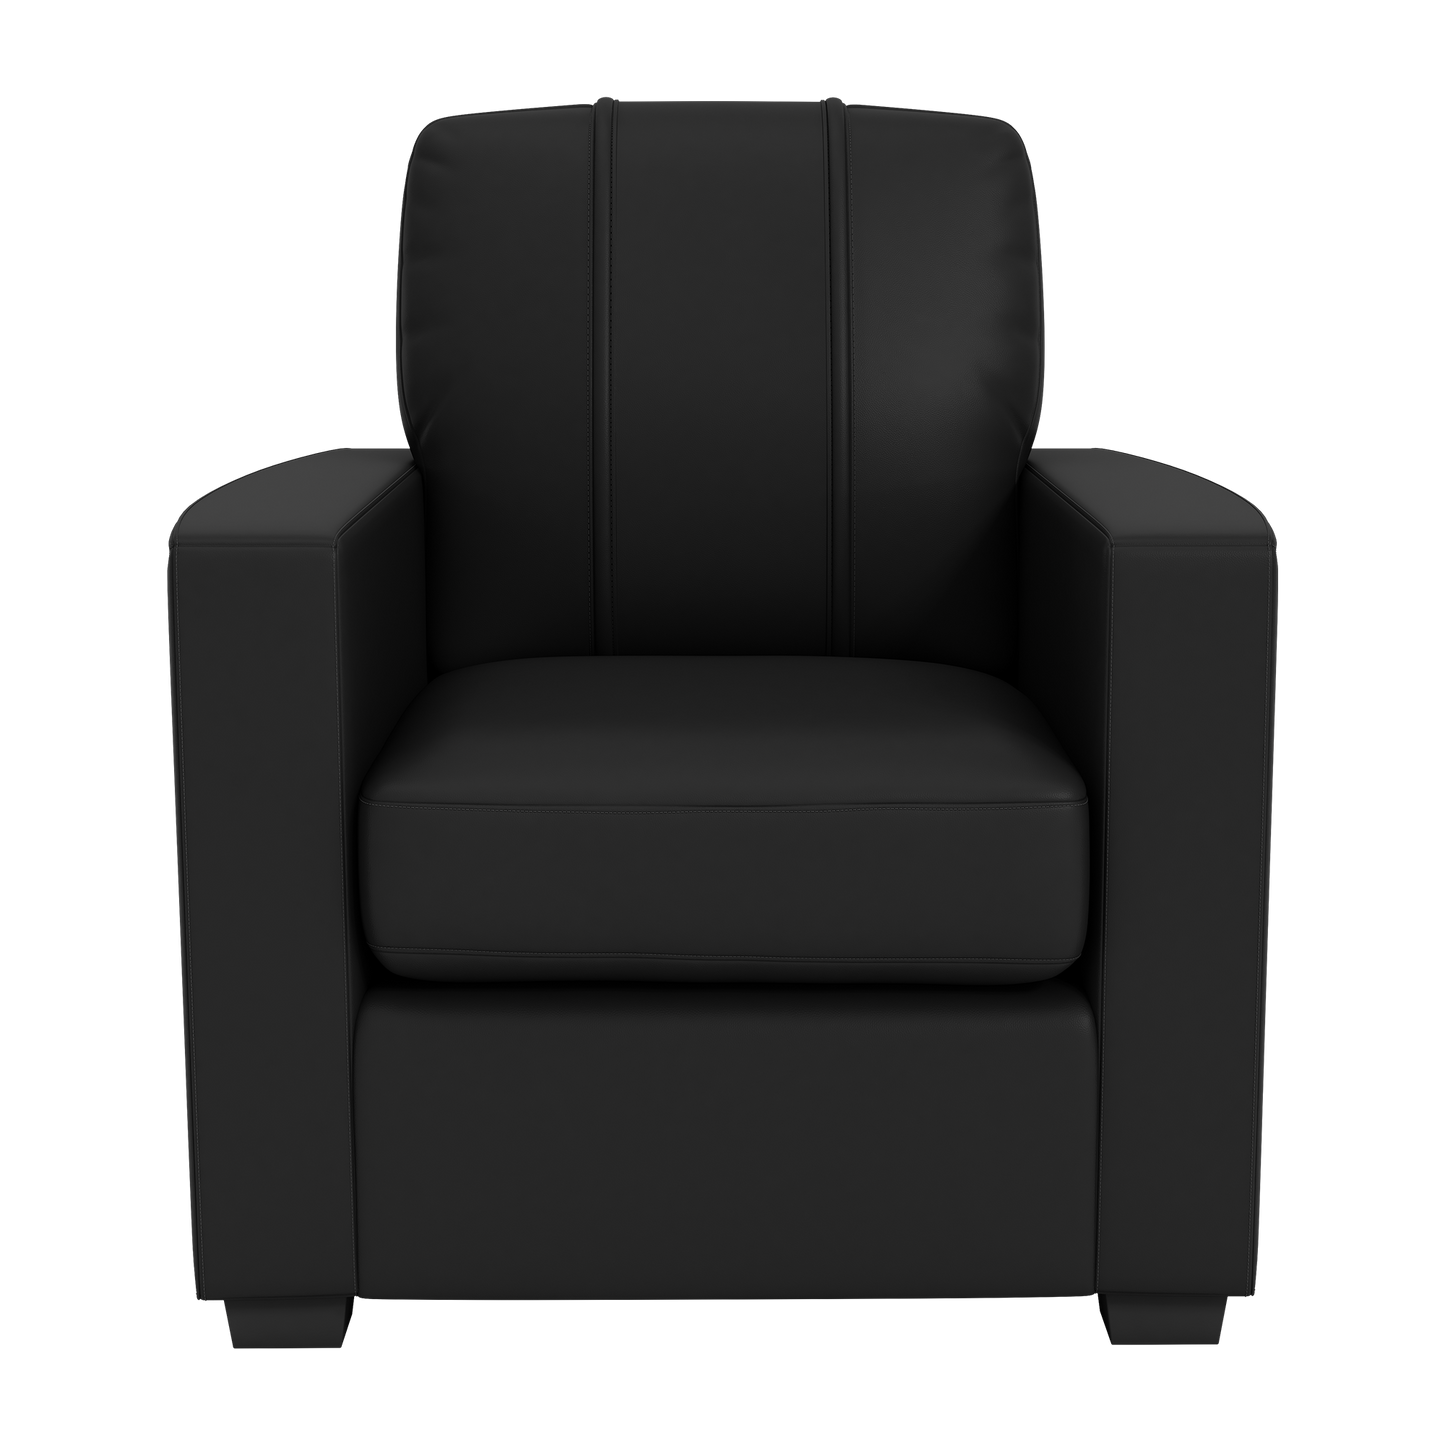 Silver Club Chair with  New York Jets Helmet Logo